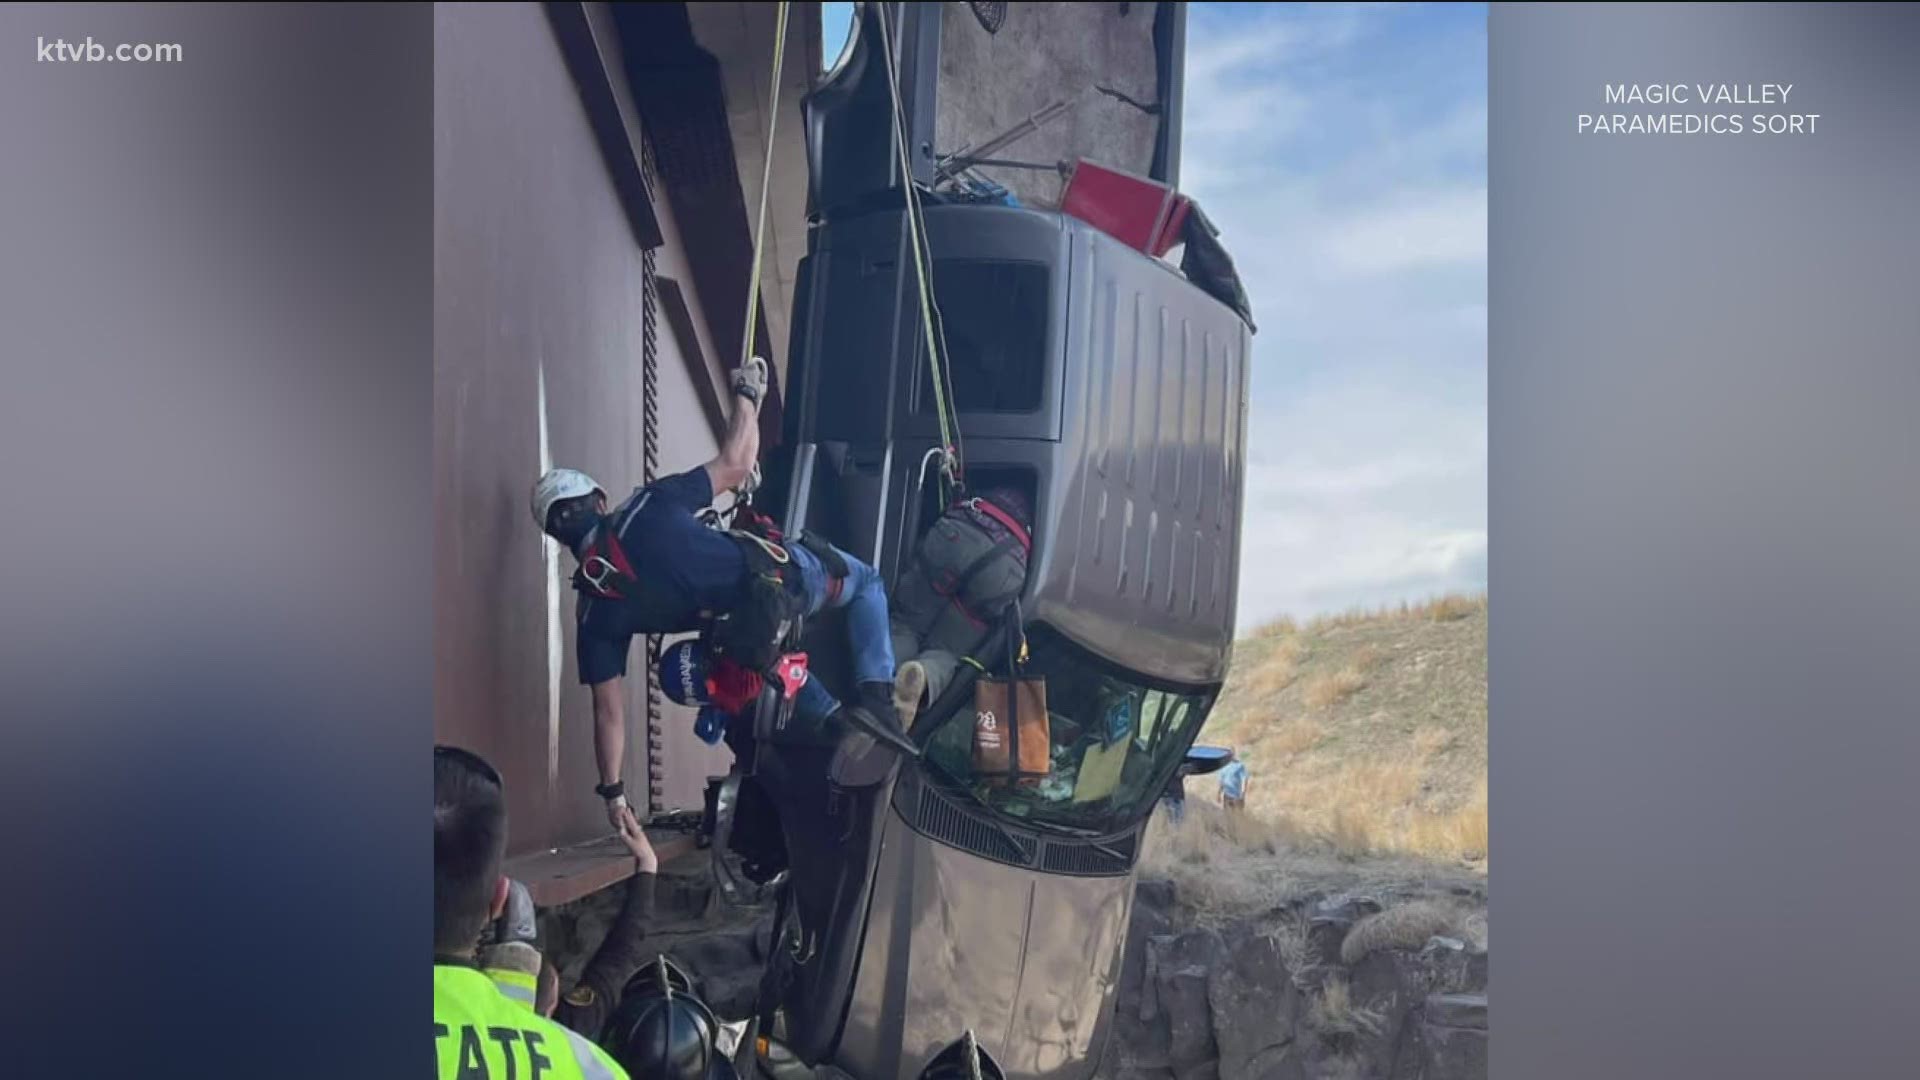 Chad Smith and Issac Baker were part of the team that rescued a couple and two dogs from a truck dangling over Malad Gorge on Monday.